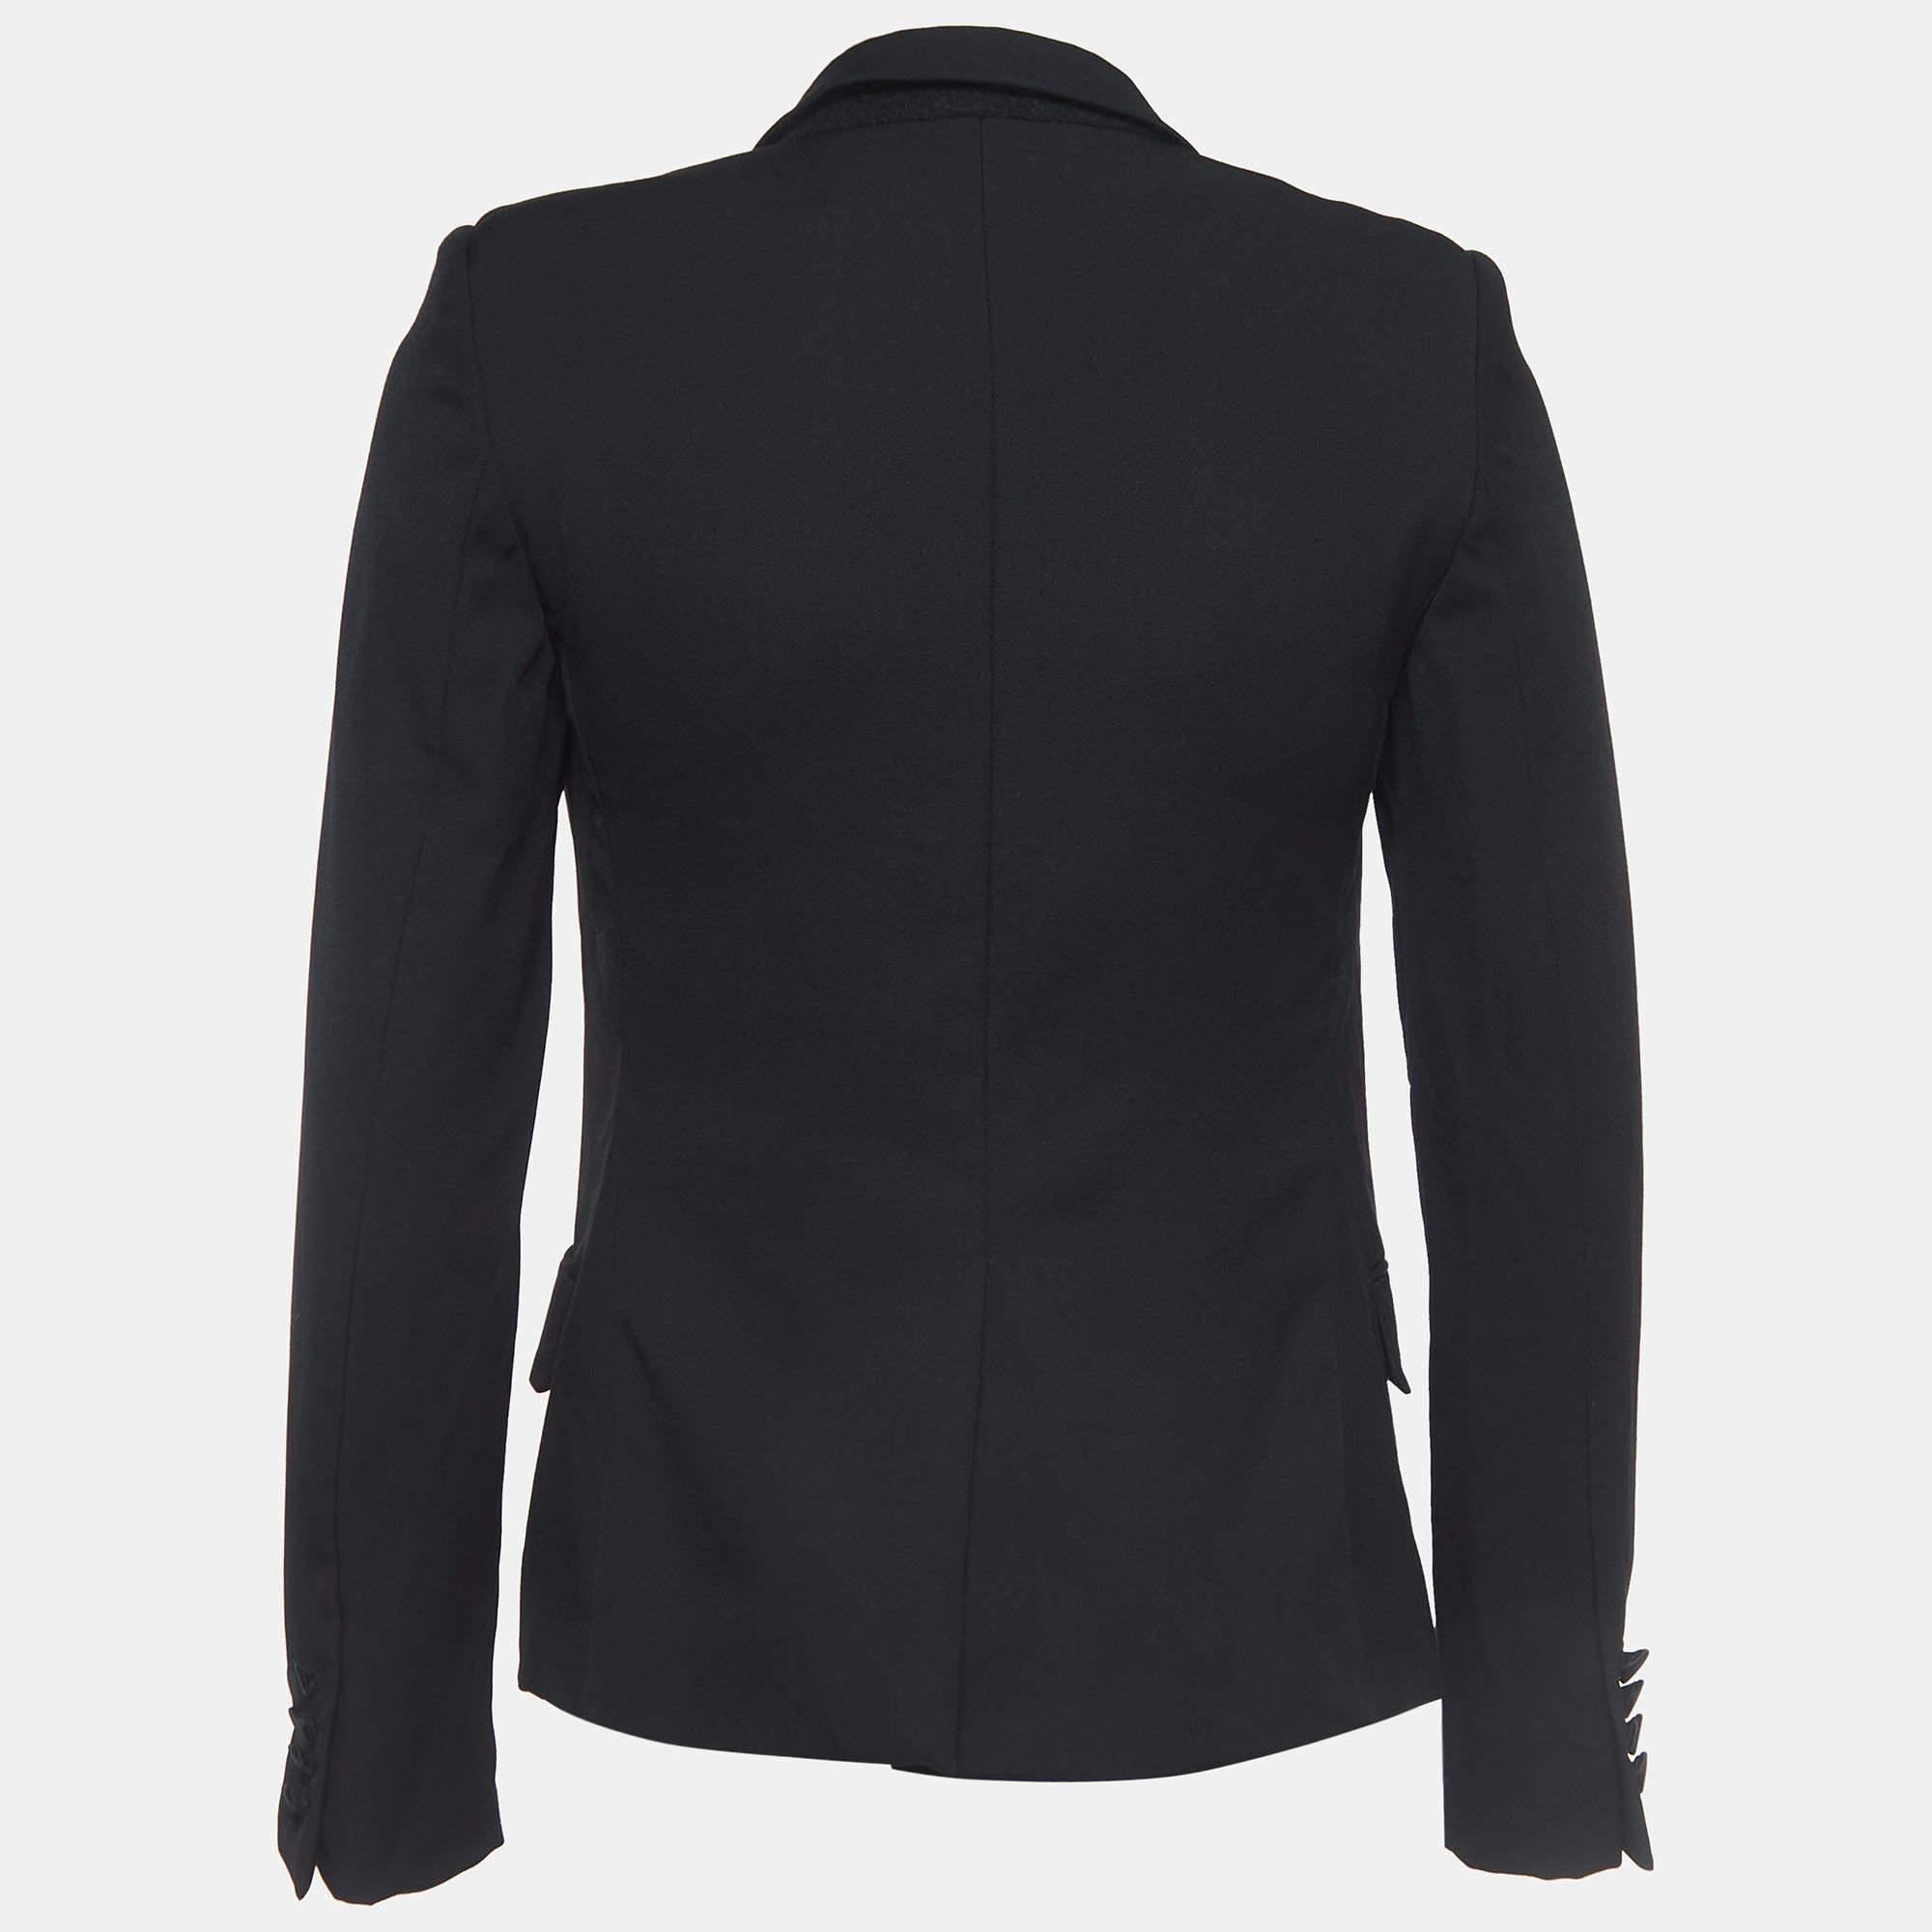 This Saint Laurent blazer brings you both class and luxury as you wear it. It is highlighted with long sleeves and classic details, thus granting a polished, formal finish.

